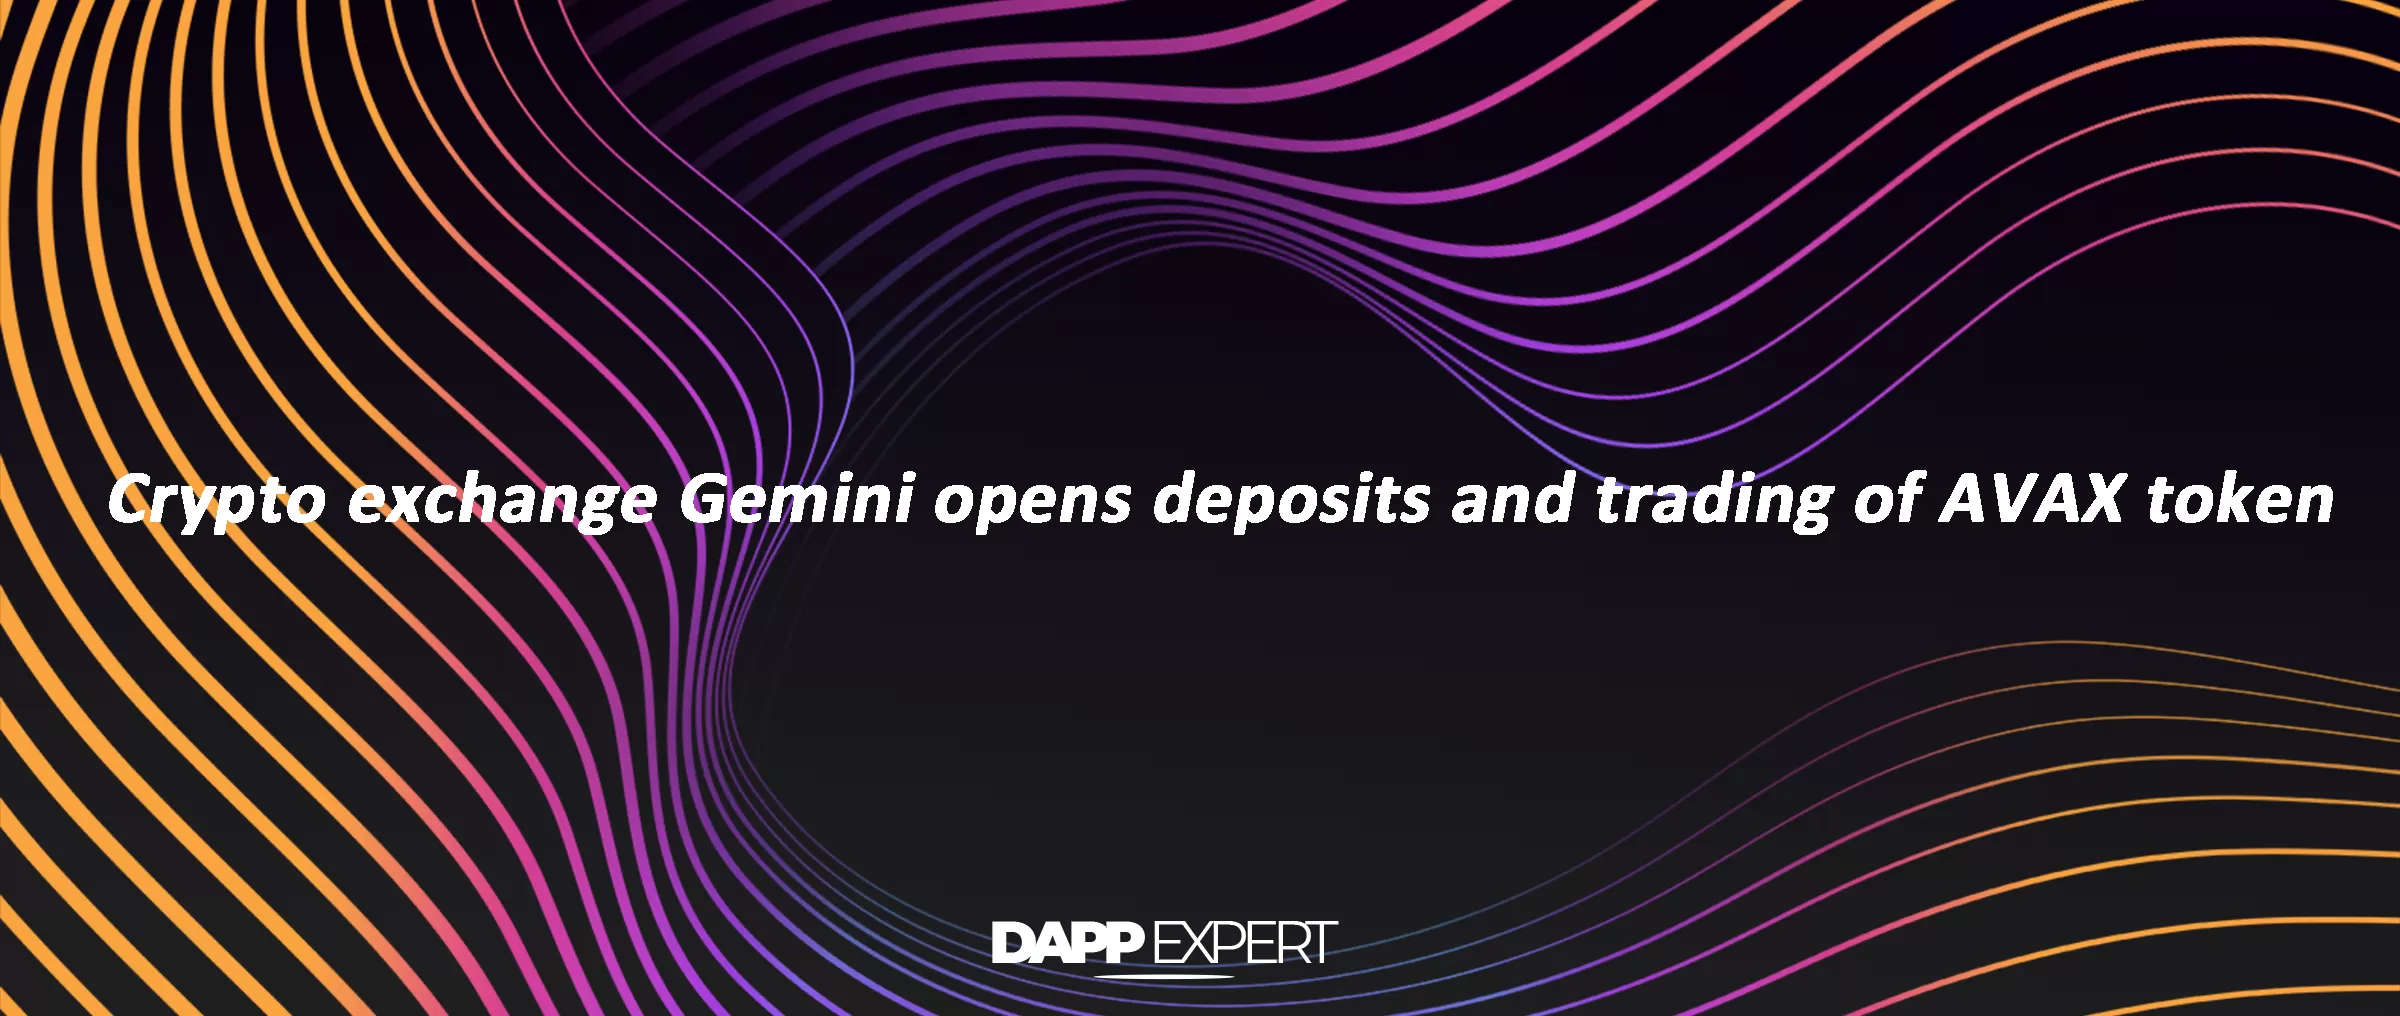 Crypto exchange Gemini opens deposits and trading of AVAX token